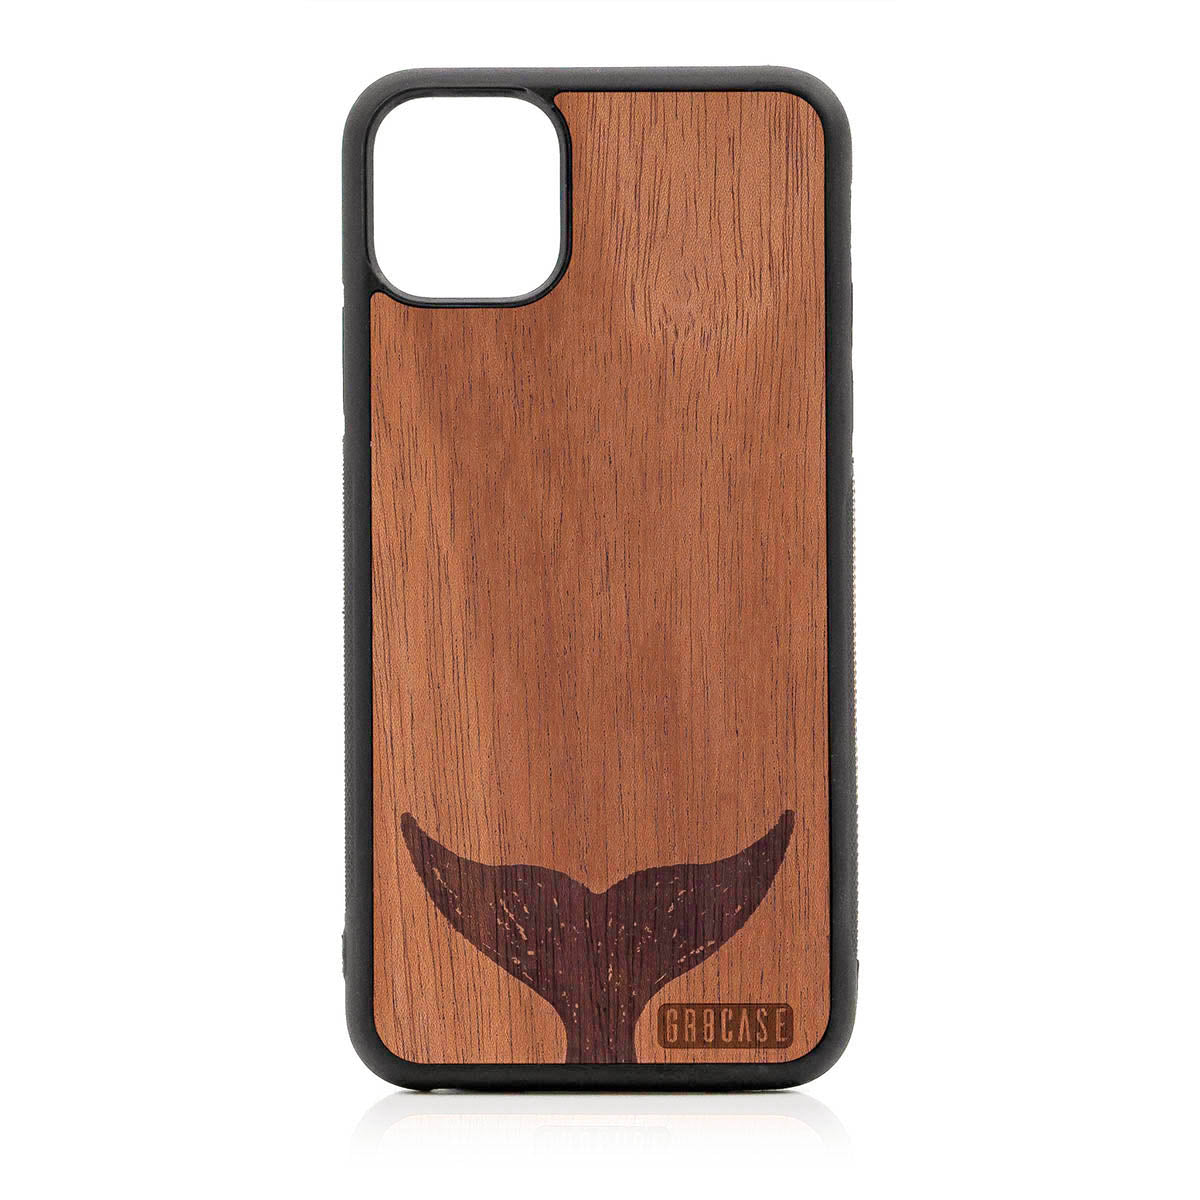 Whale Tail Design Wood Case For iPhone 11 Pro Max